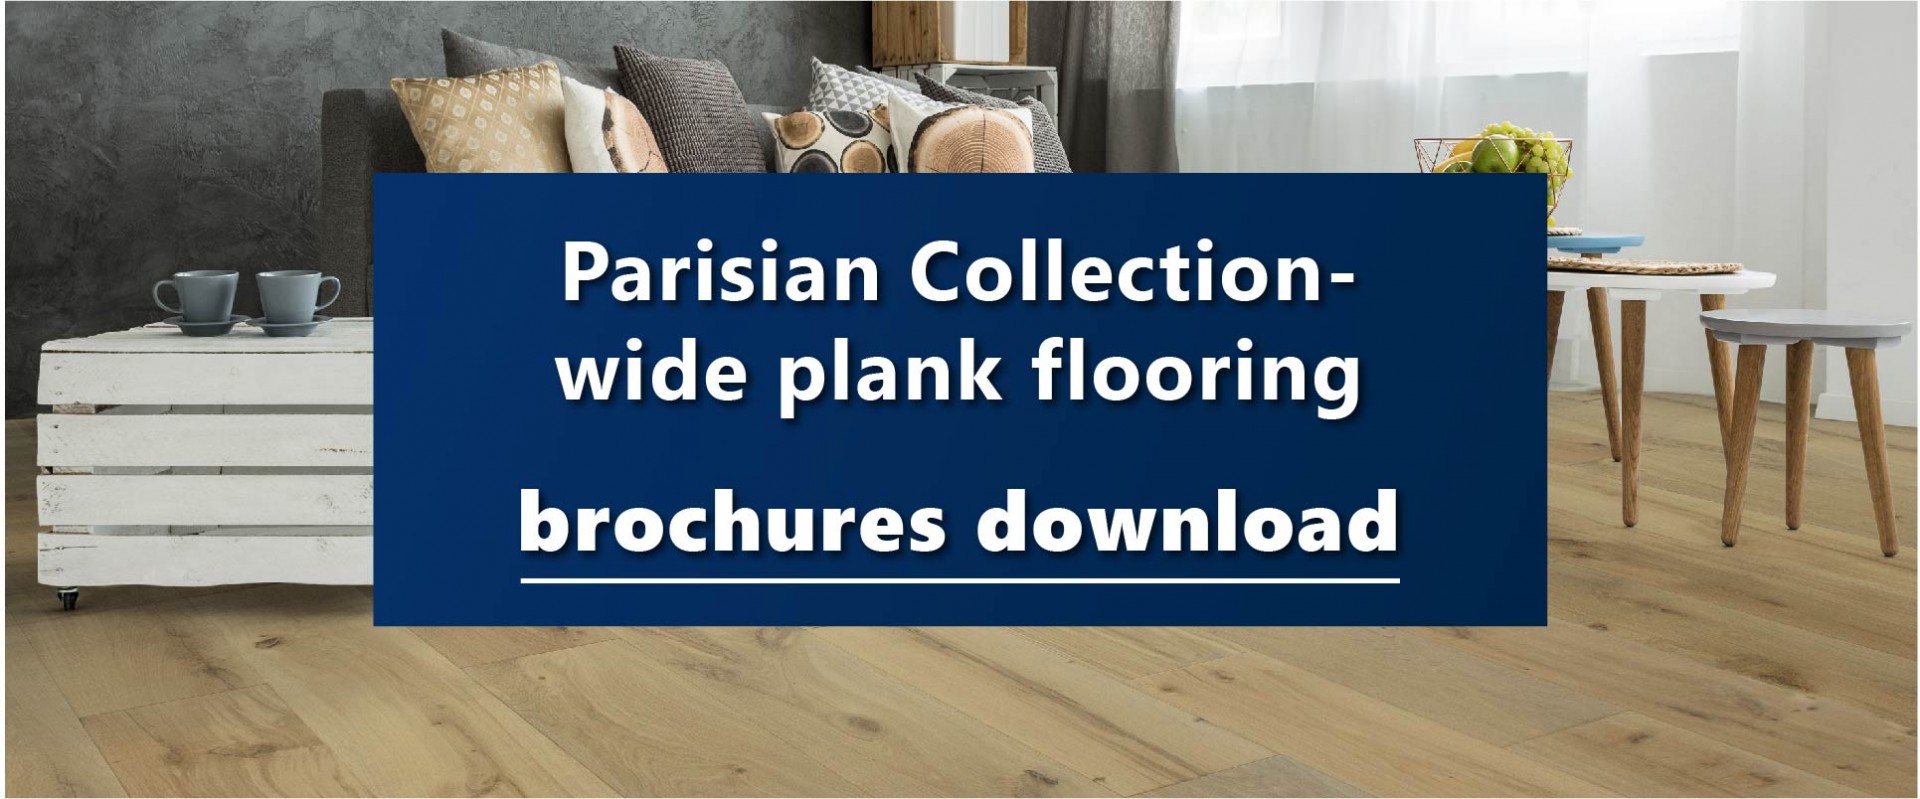 Download out Parisian Collection wide plank hardwood flooring brochure